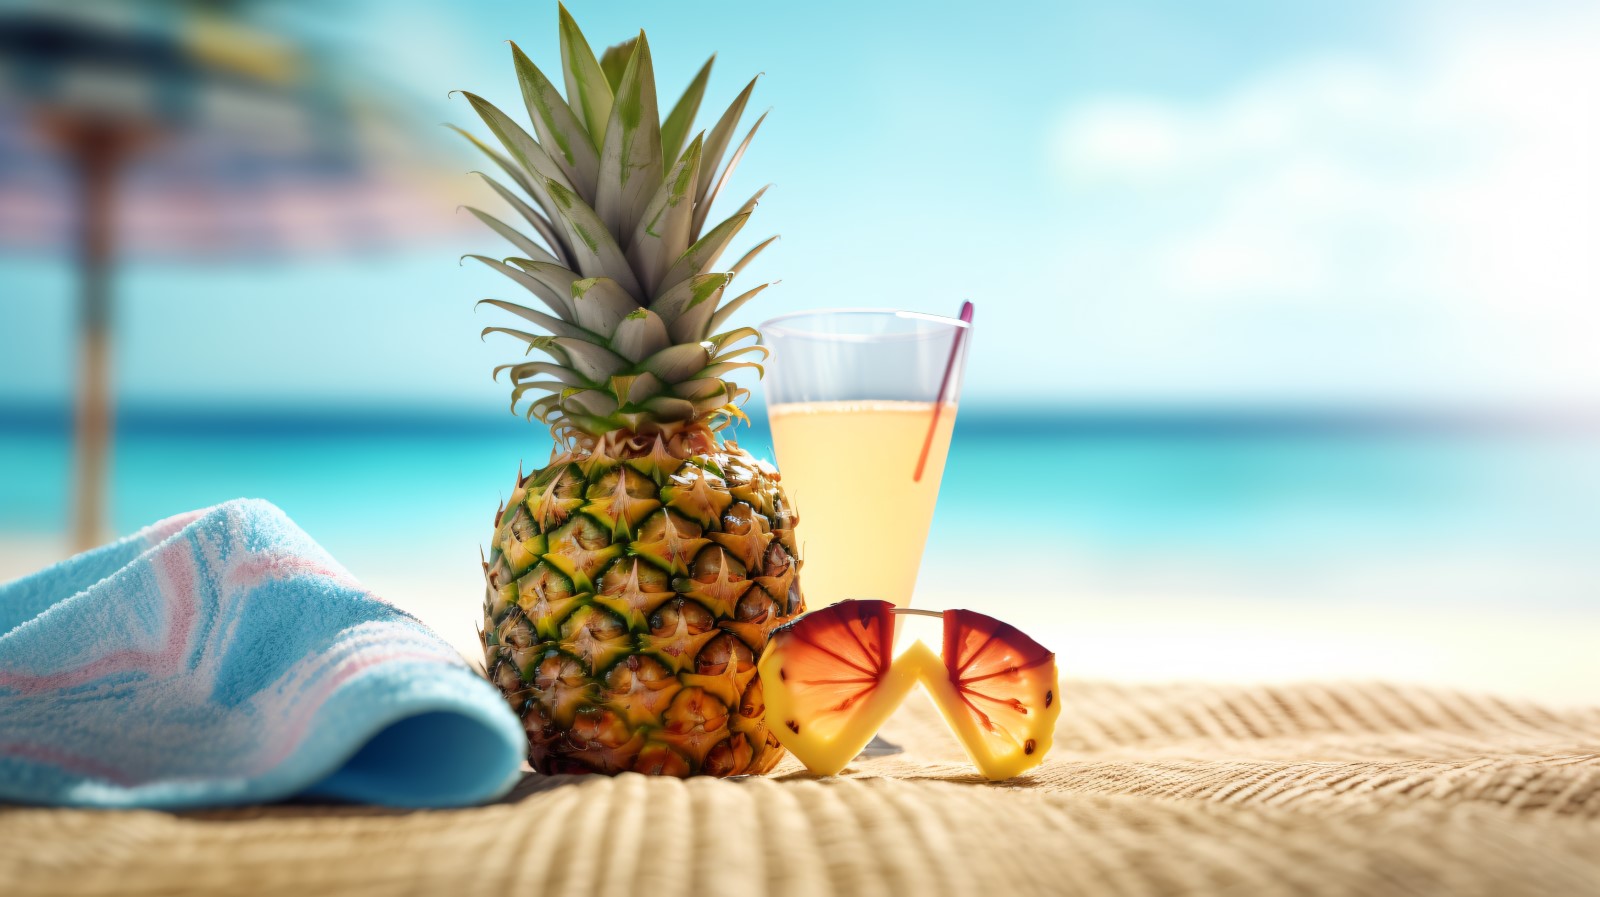 Pineapple drink in cocktail glass and sand beach scene 406